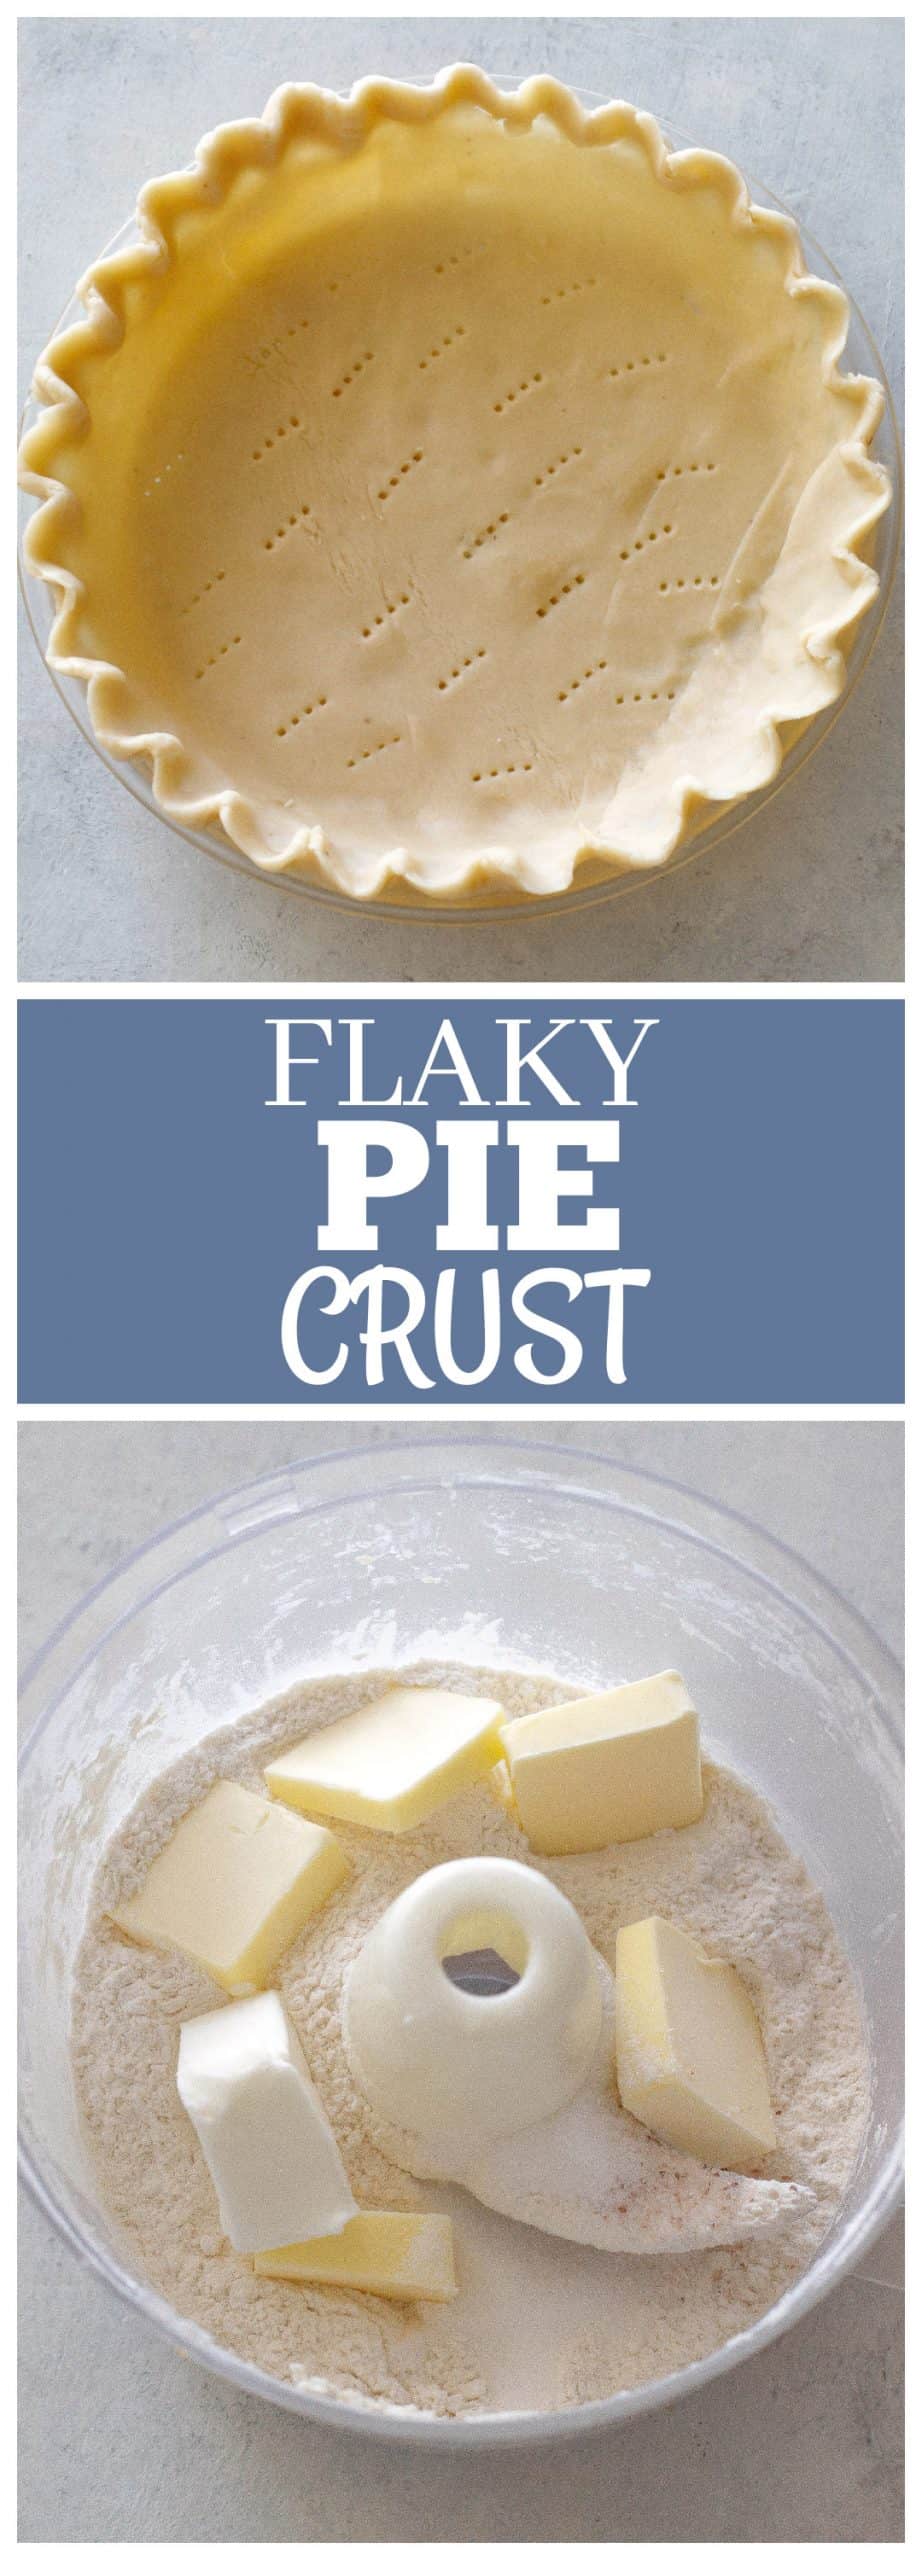 All Butter Flaky Pie Dough: Step-by-Step Tutorial - Curly Girl Kitchen